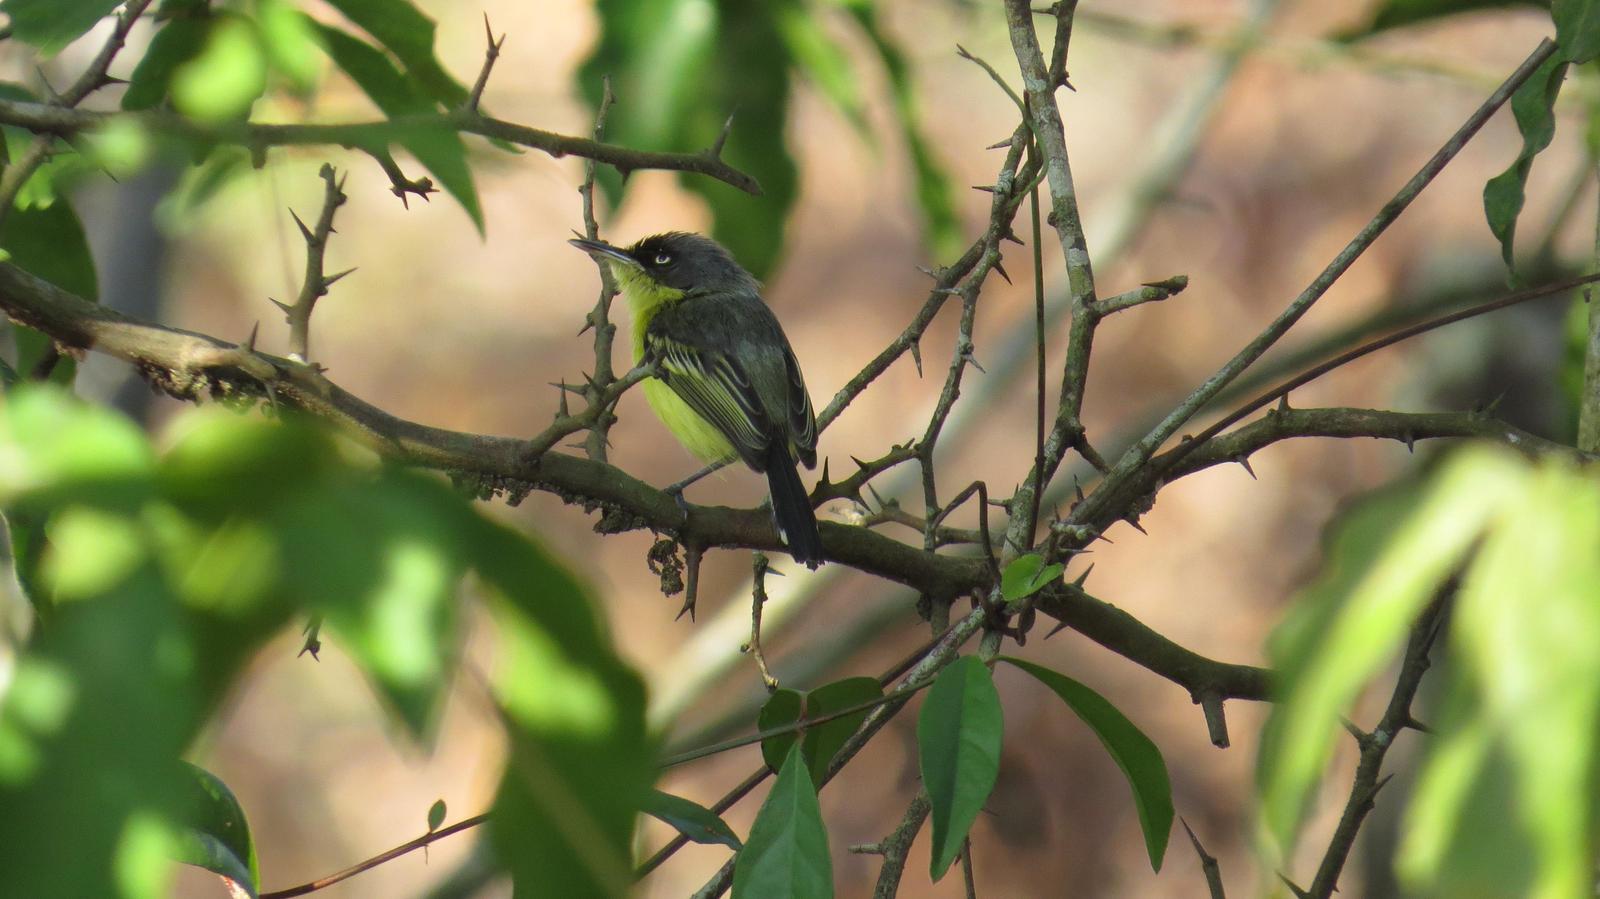 Common Tody-Flycatcher Photo by Lisa Owens